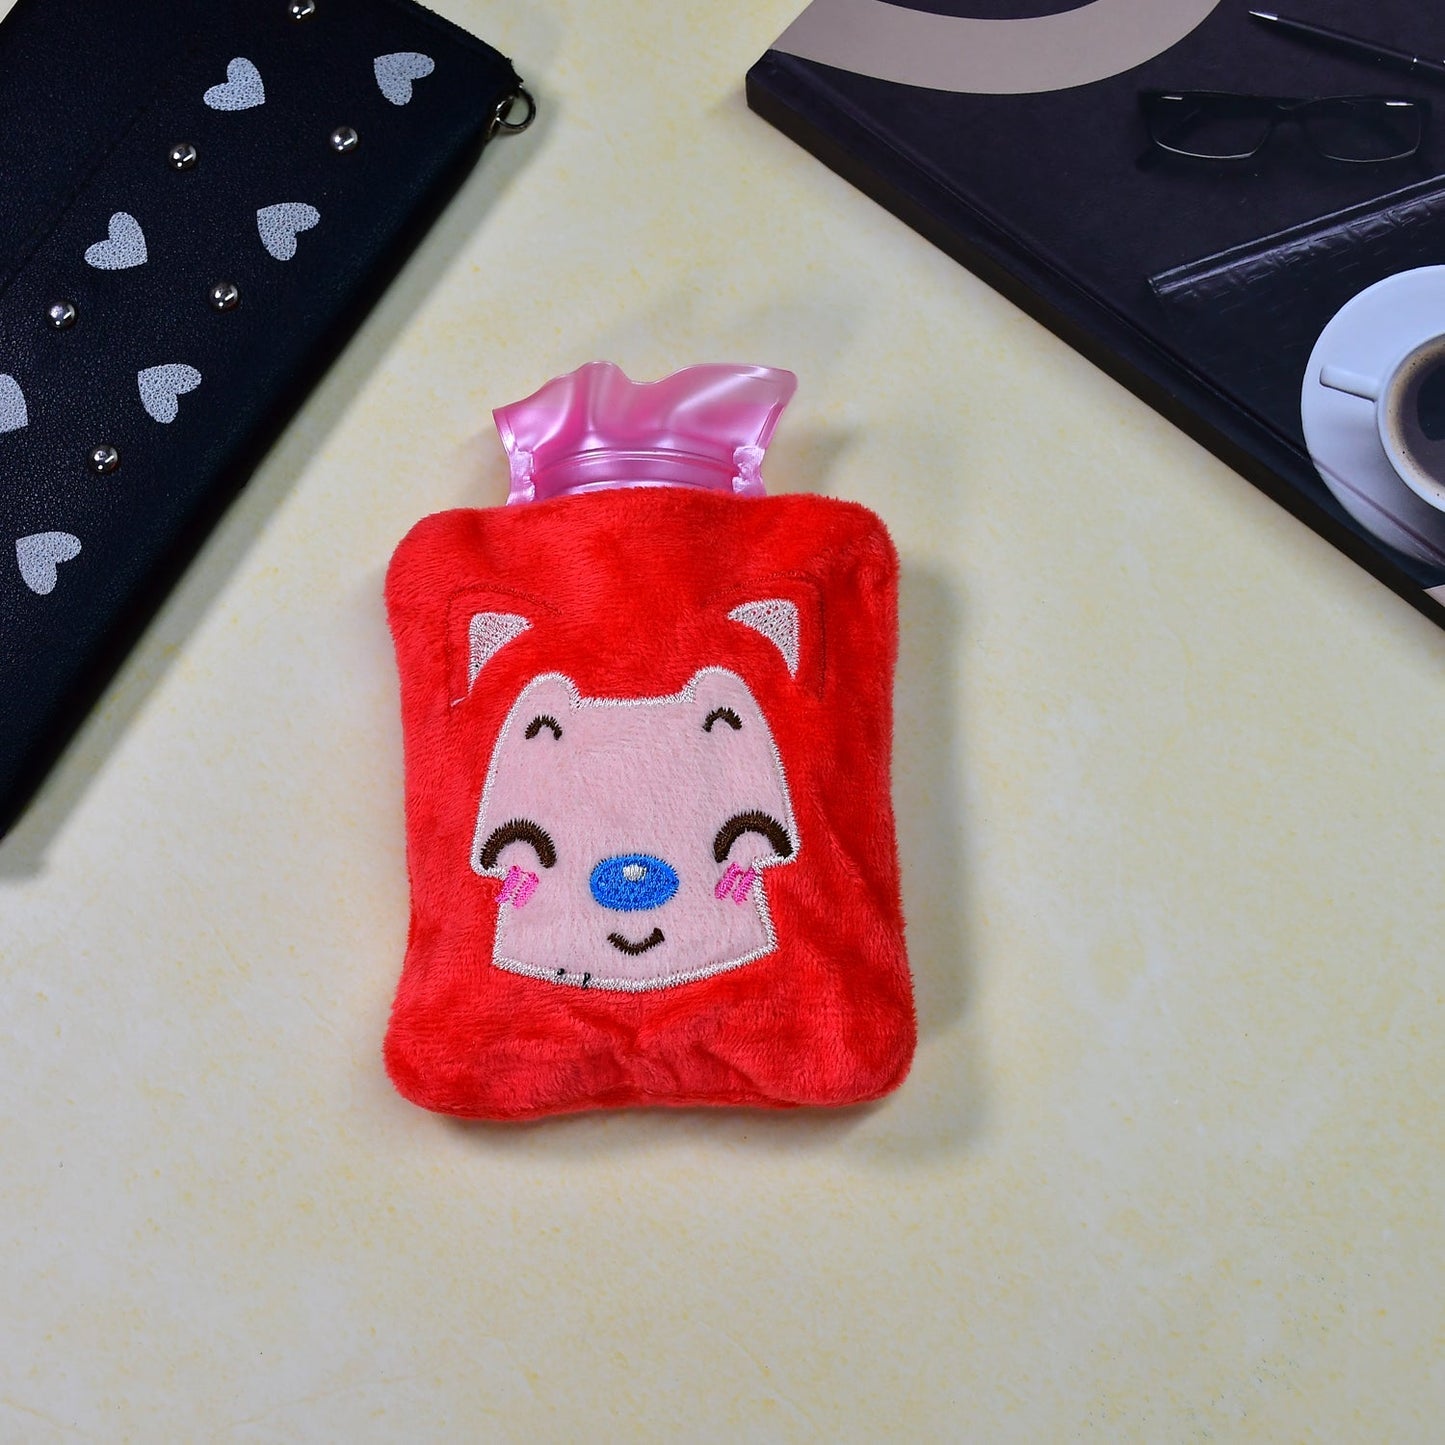 Pink Cat small Hot Water Bag with Cover for Pain Relief, Neck, Shoulder Pain and Hand, Feet Warmer, Menstrual Cramps